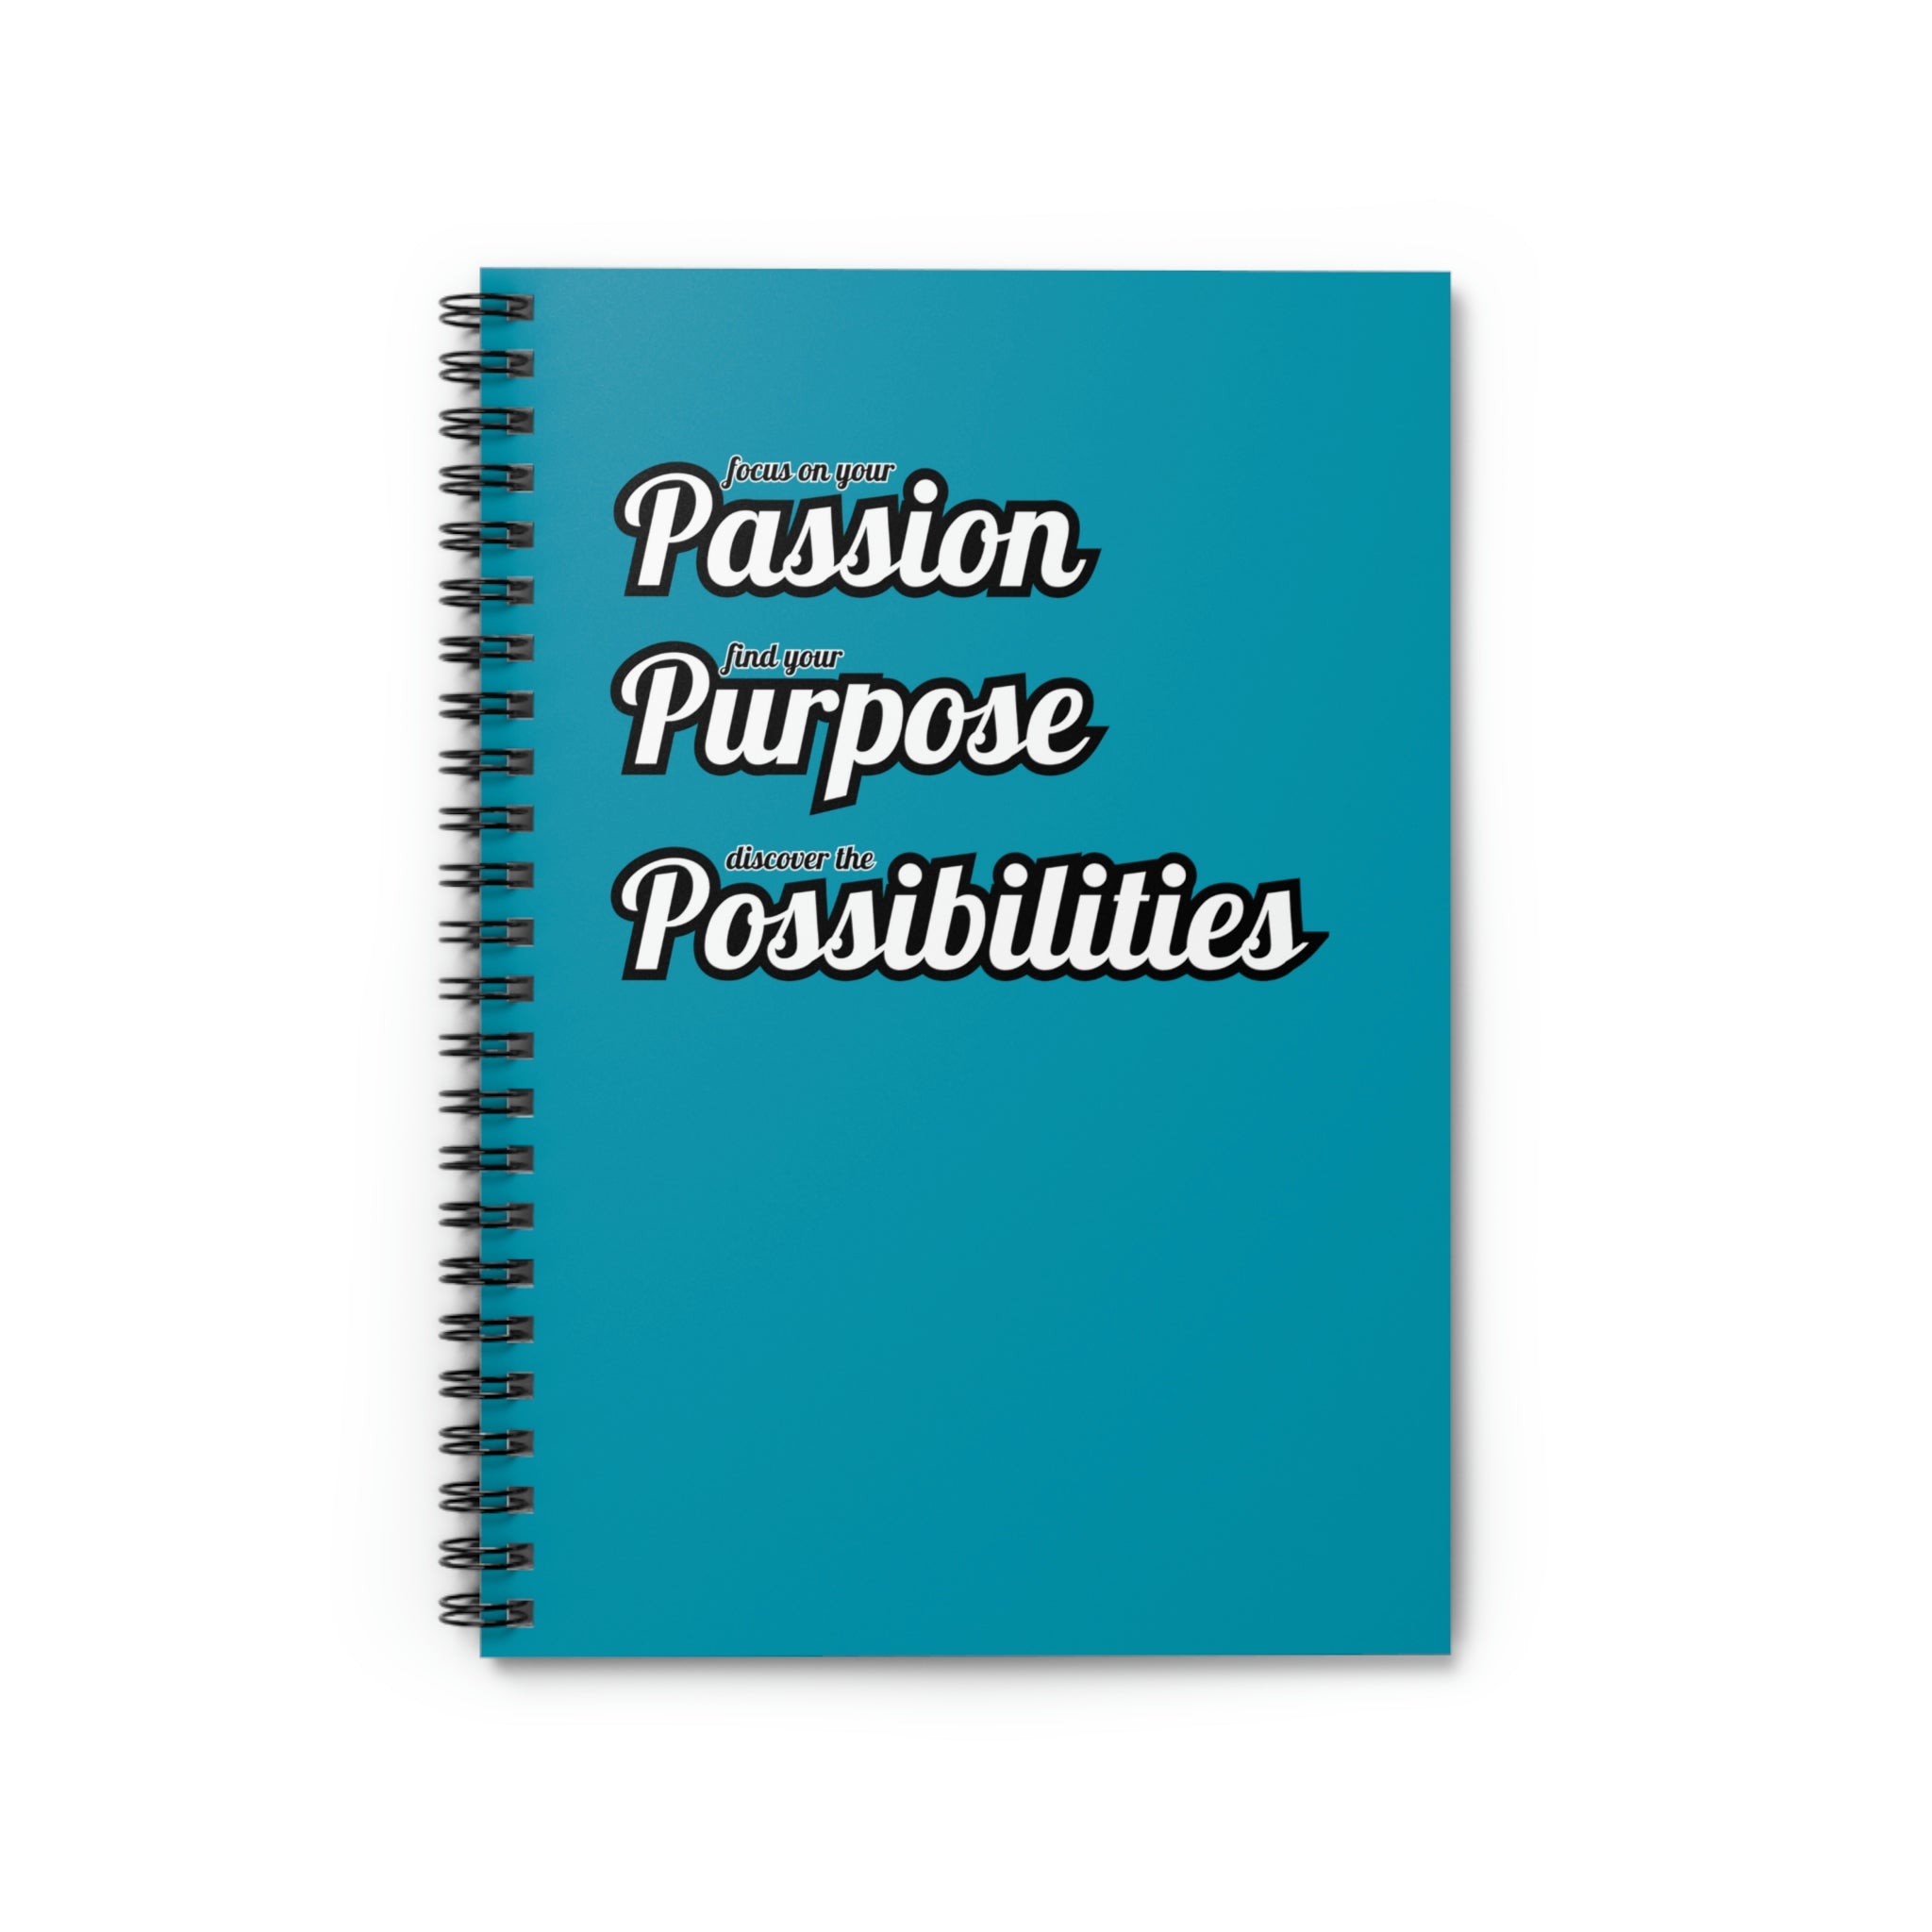 Focus On Your Passion, Find Your Purpose, Discover The Possibilities Spiral Notebook - The Kindness Cause